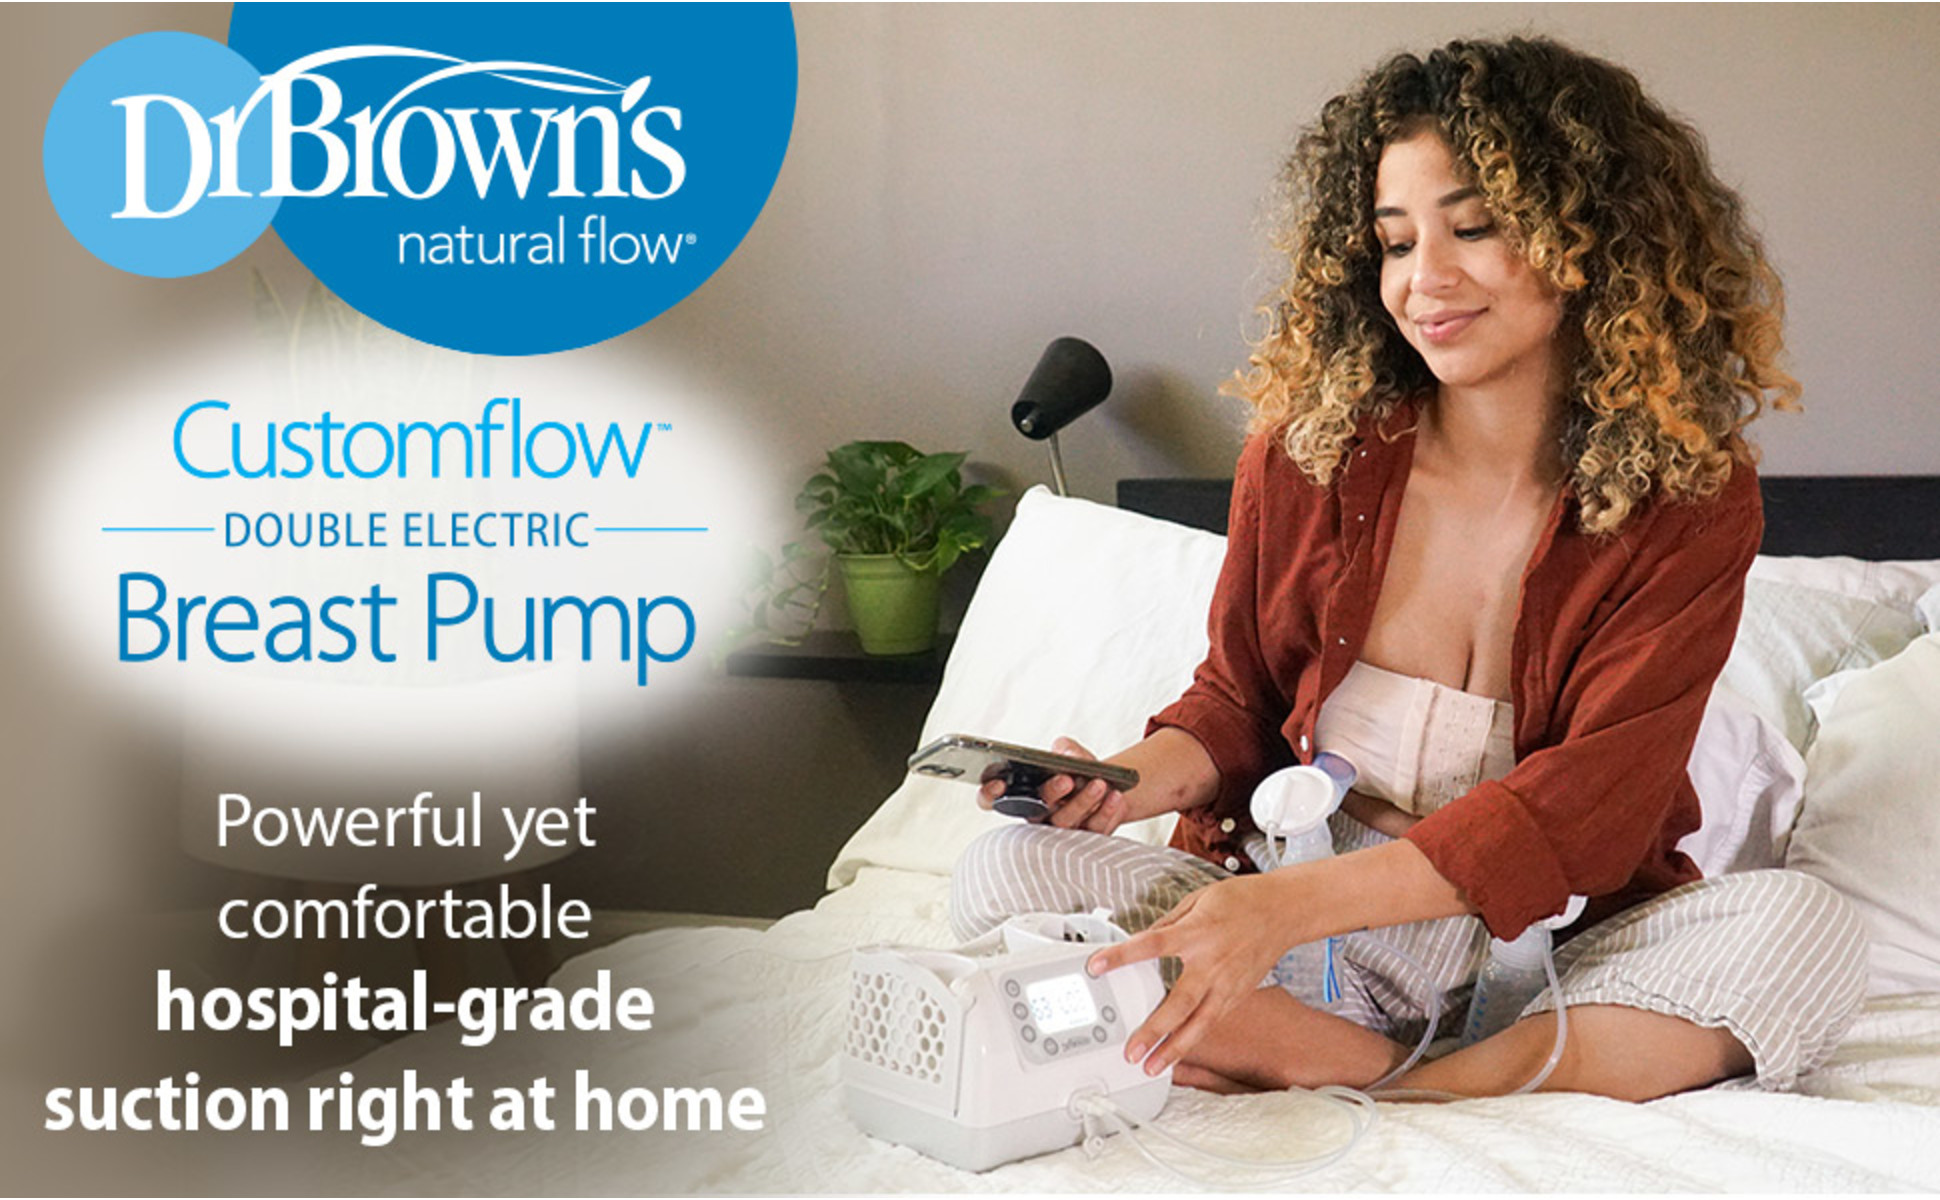 Dr. Brown's™ Customflow™ Double Electric Breast Pump